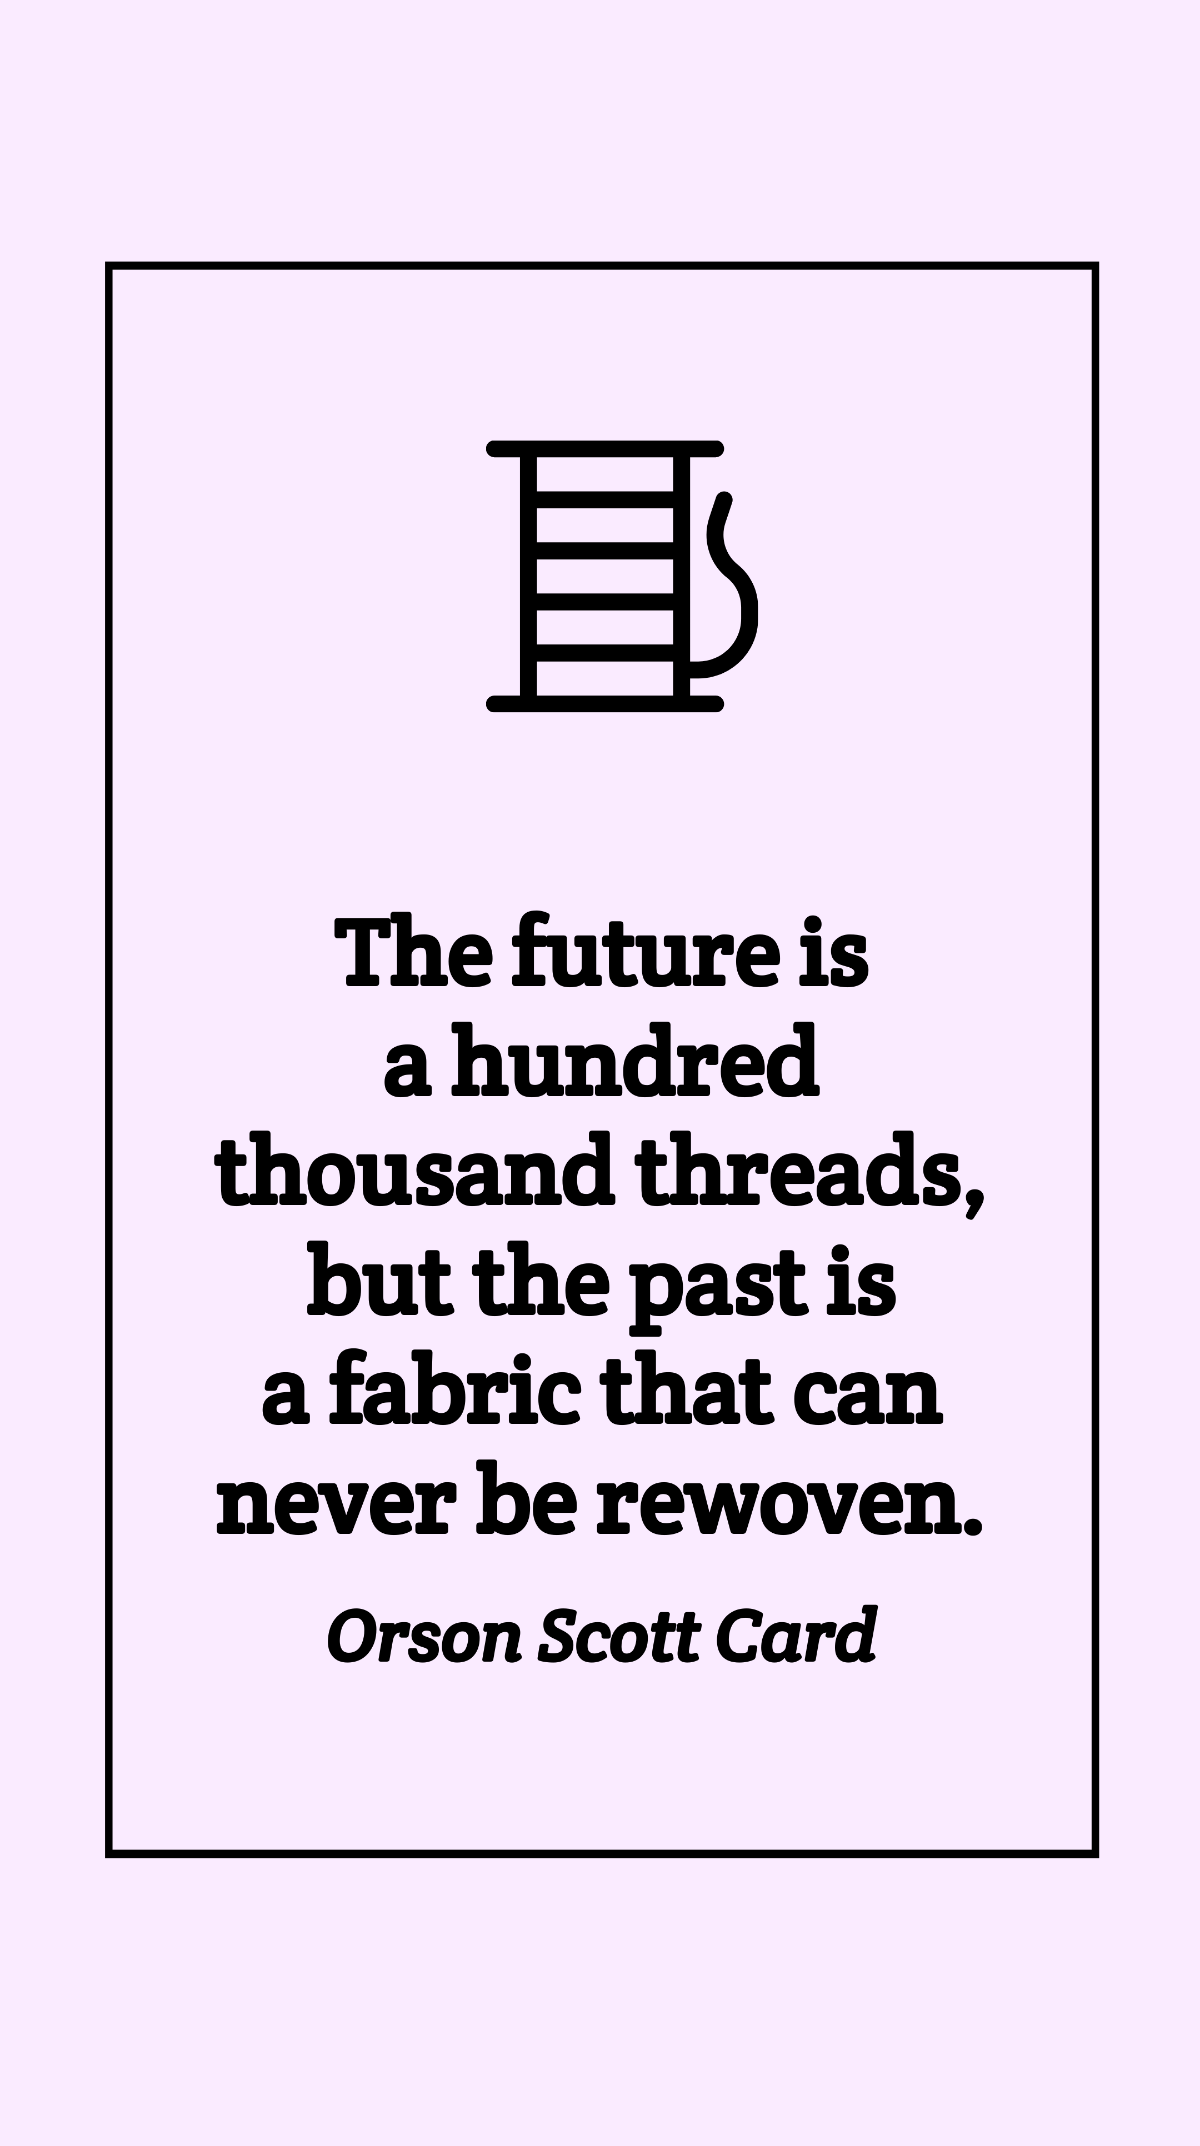 Free Orson Scott Card - The future is a hundred thousand threads, but the past is a fabric that can never be rewoven. Template